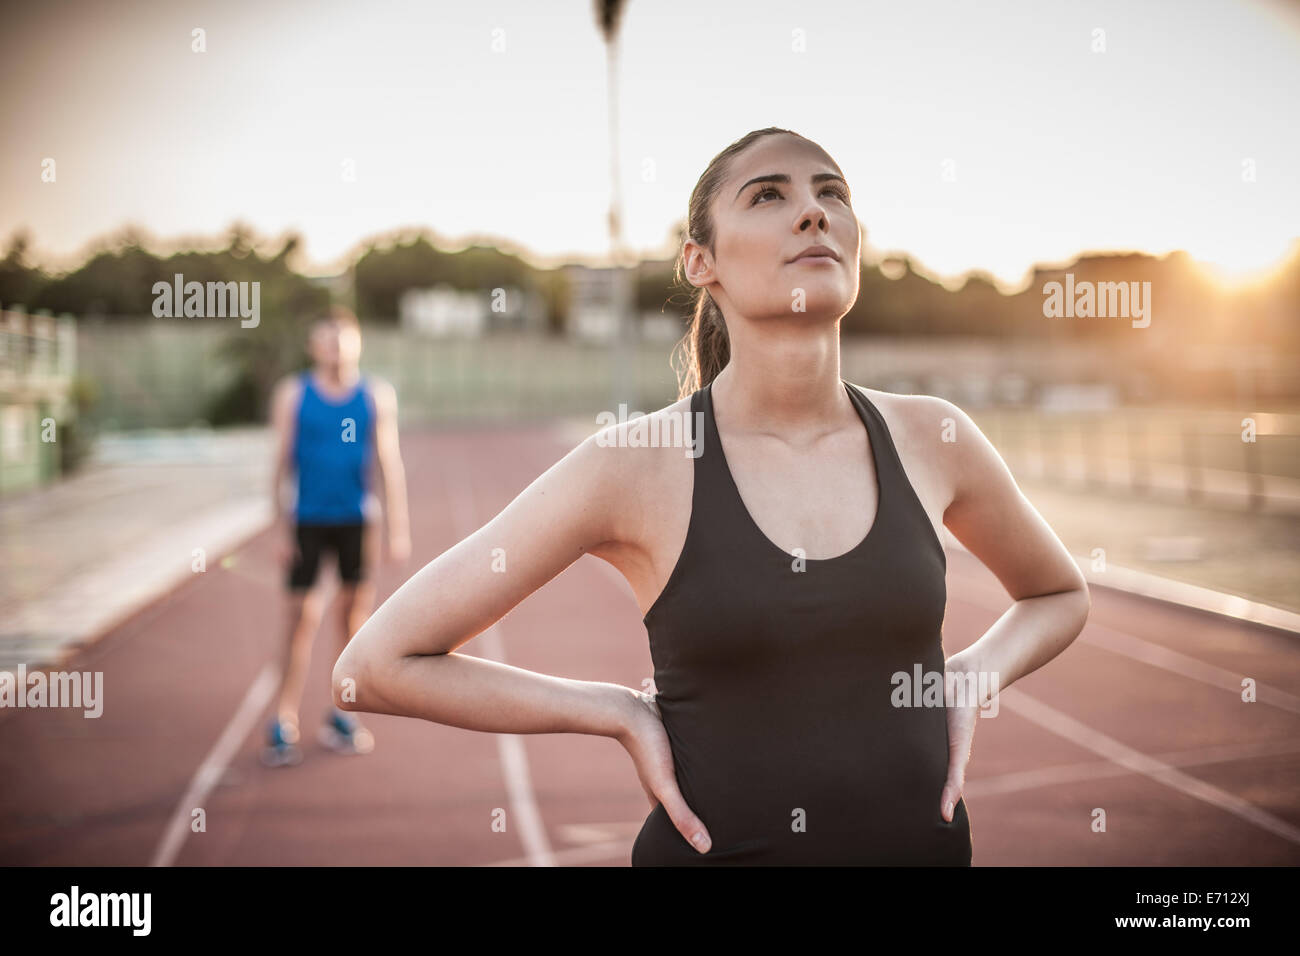 Young woman with hands on hips on running track Stock Photo